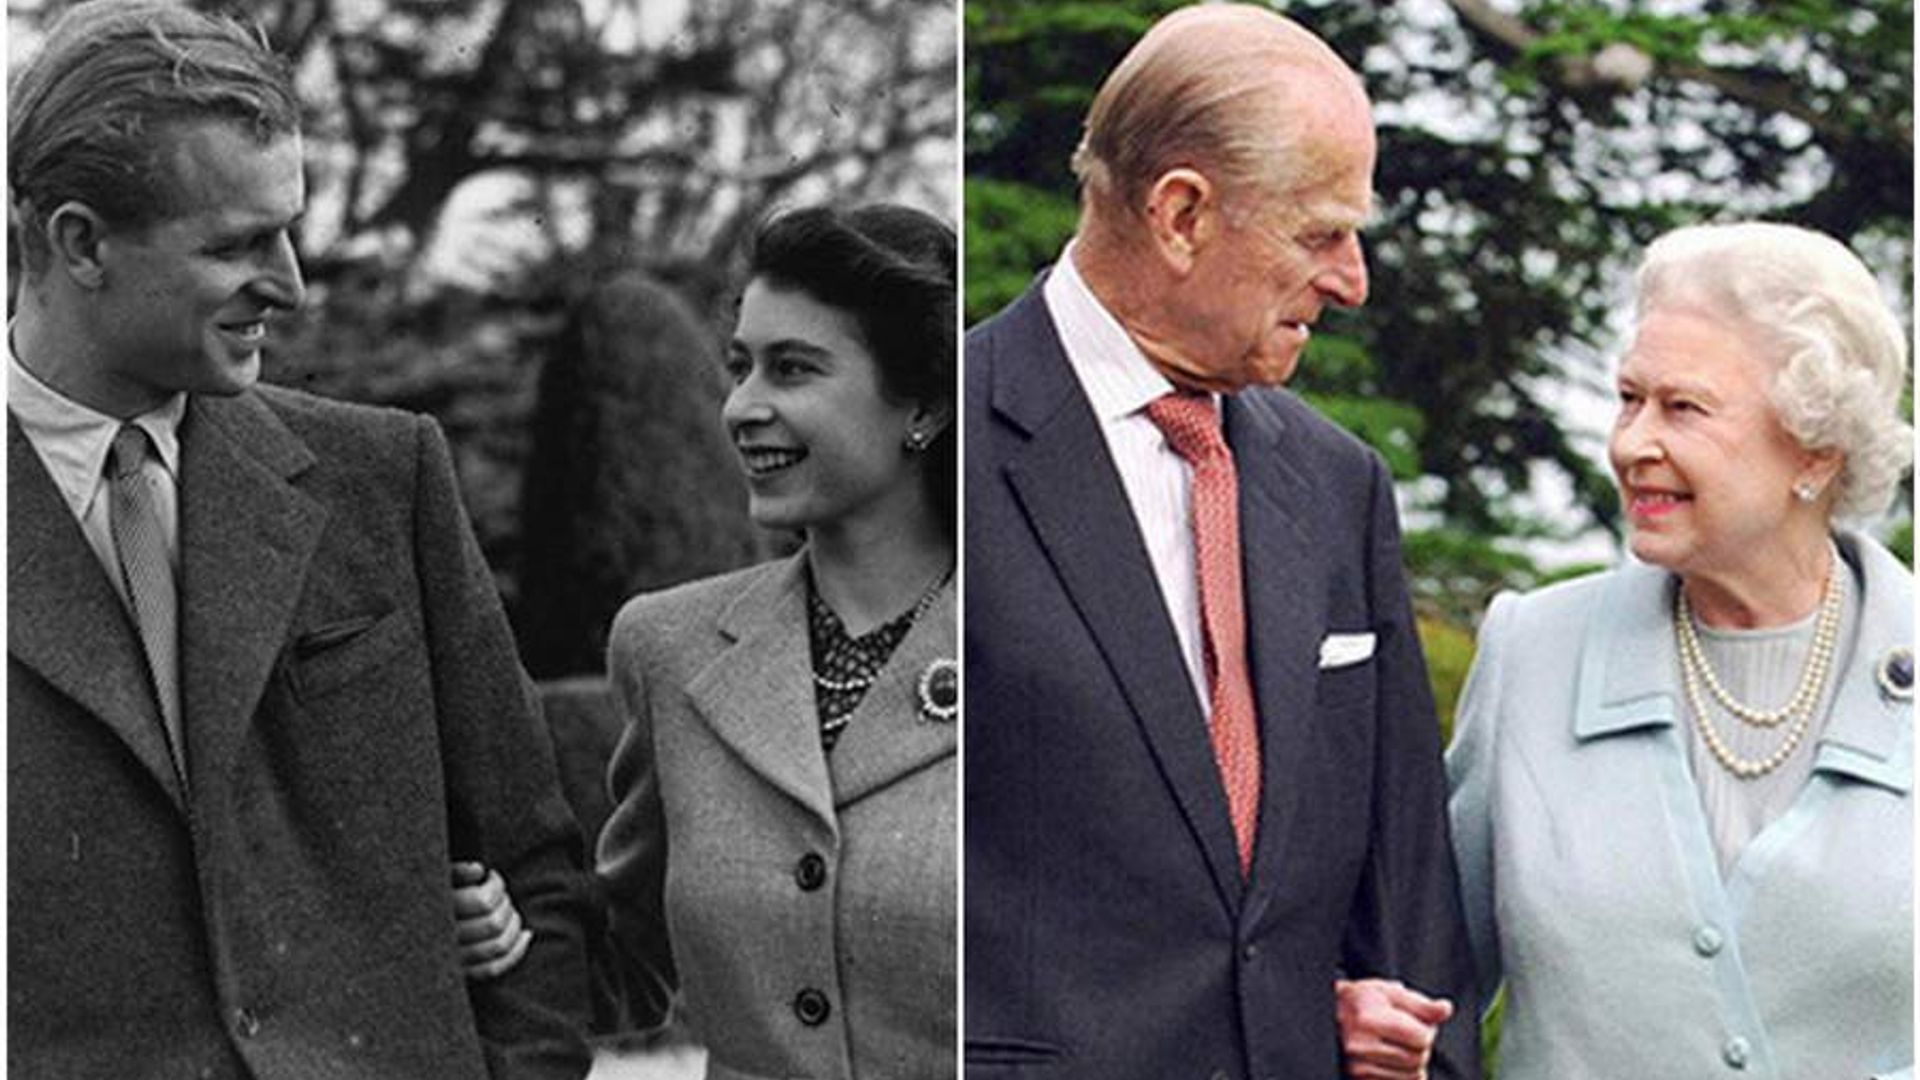 Royal experts think Queen Elizabeth will step down when Prince Philip dies 